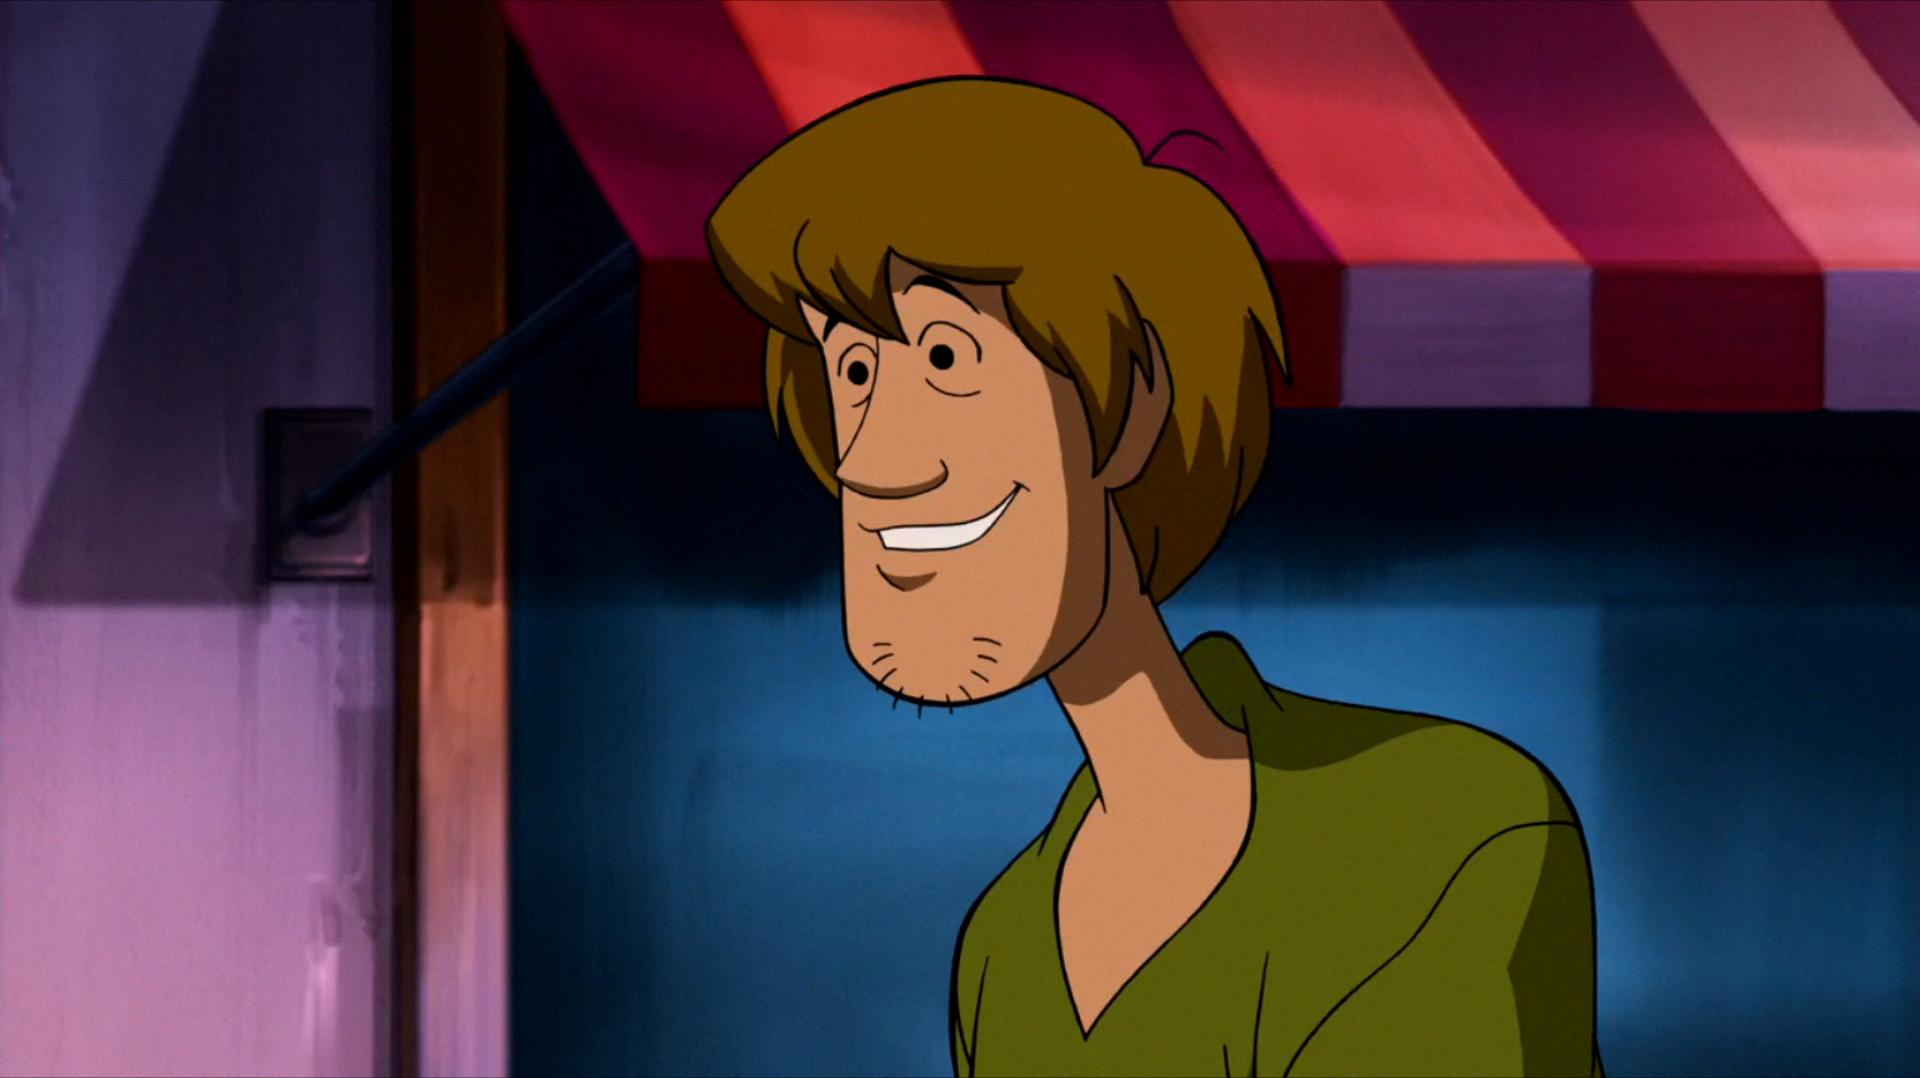 Shaggy from Scooby Doo A Short Overview